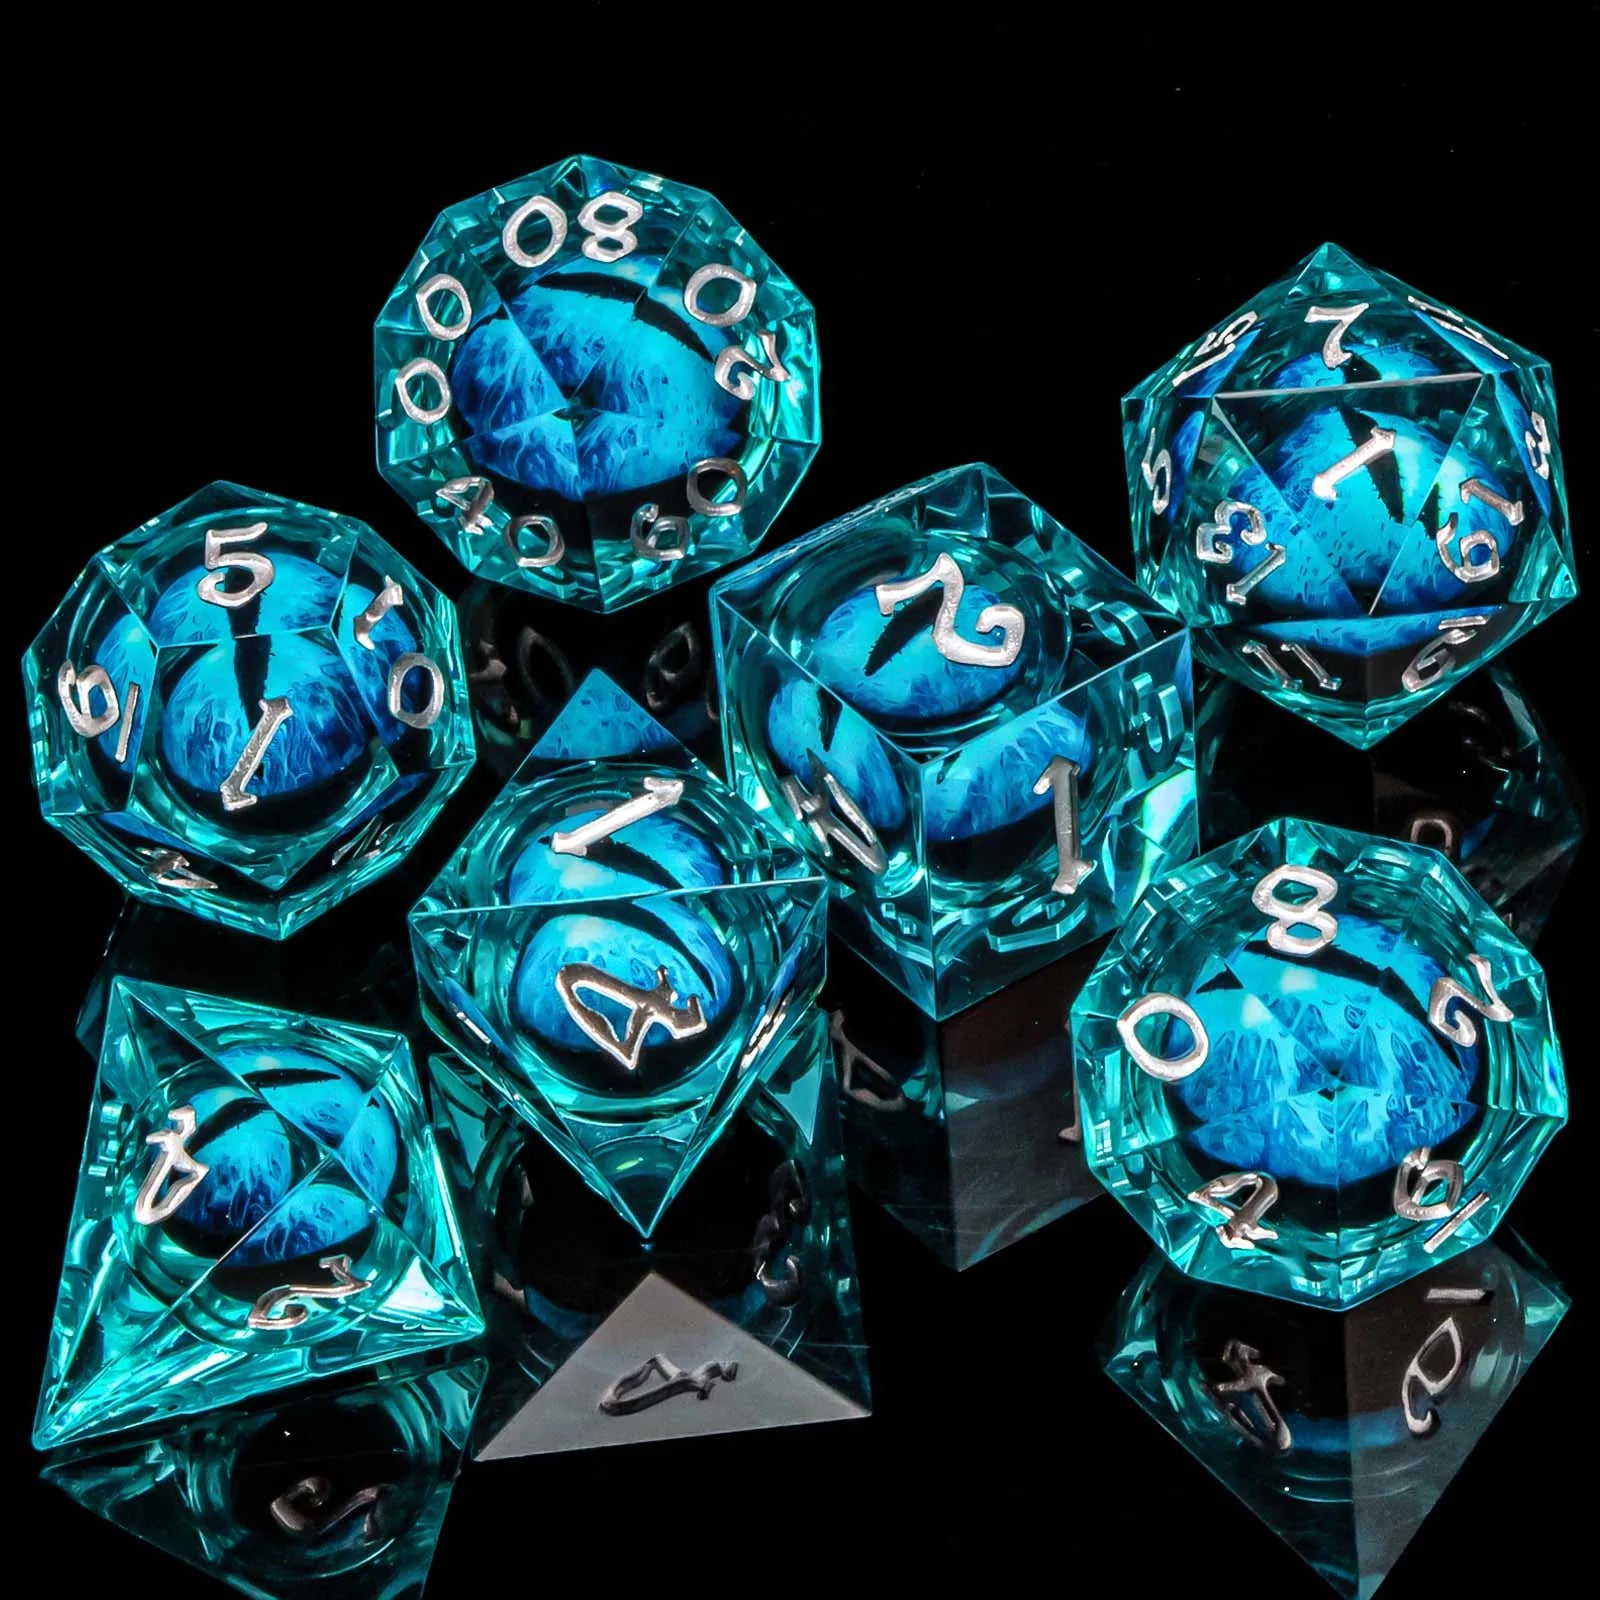 DND Eye Liquid Flow Core Resin D&D Dice Set For D and D Dungeon and Dragon Pathfinder Table Role Playing Game Polyhedral Dice AZ14